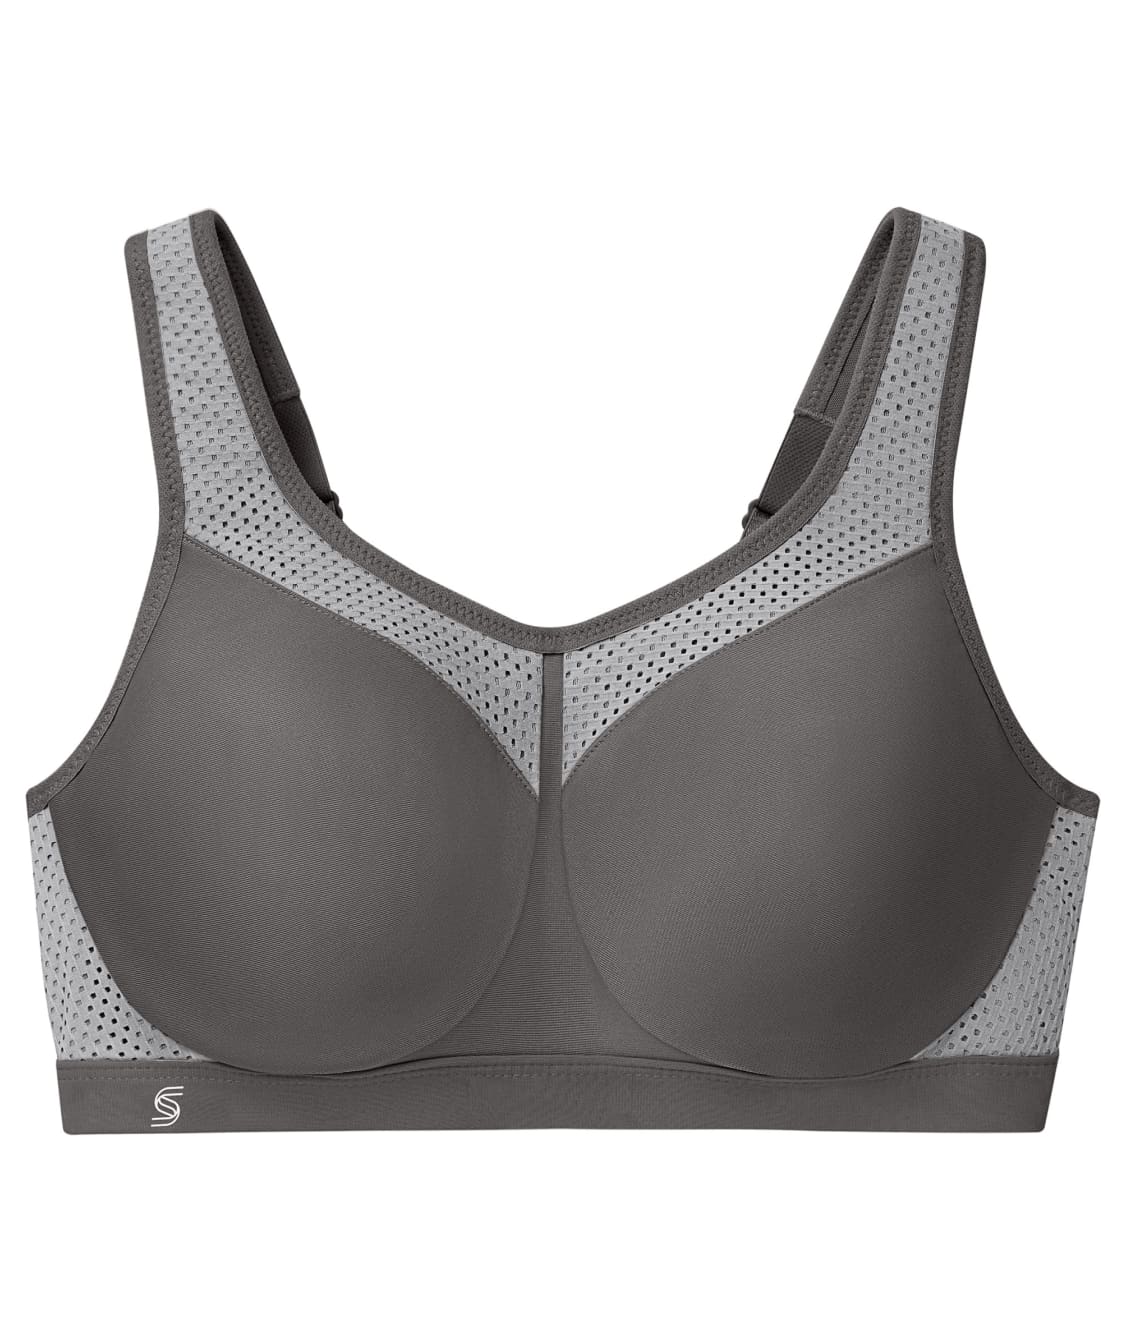 Glamorise High Impact Seamless Underwire Sports Bra And Reviews Bare Necessities Style 9066 